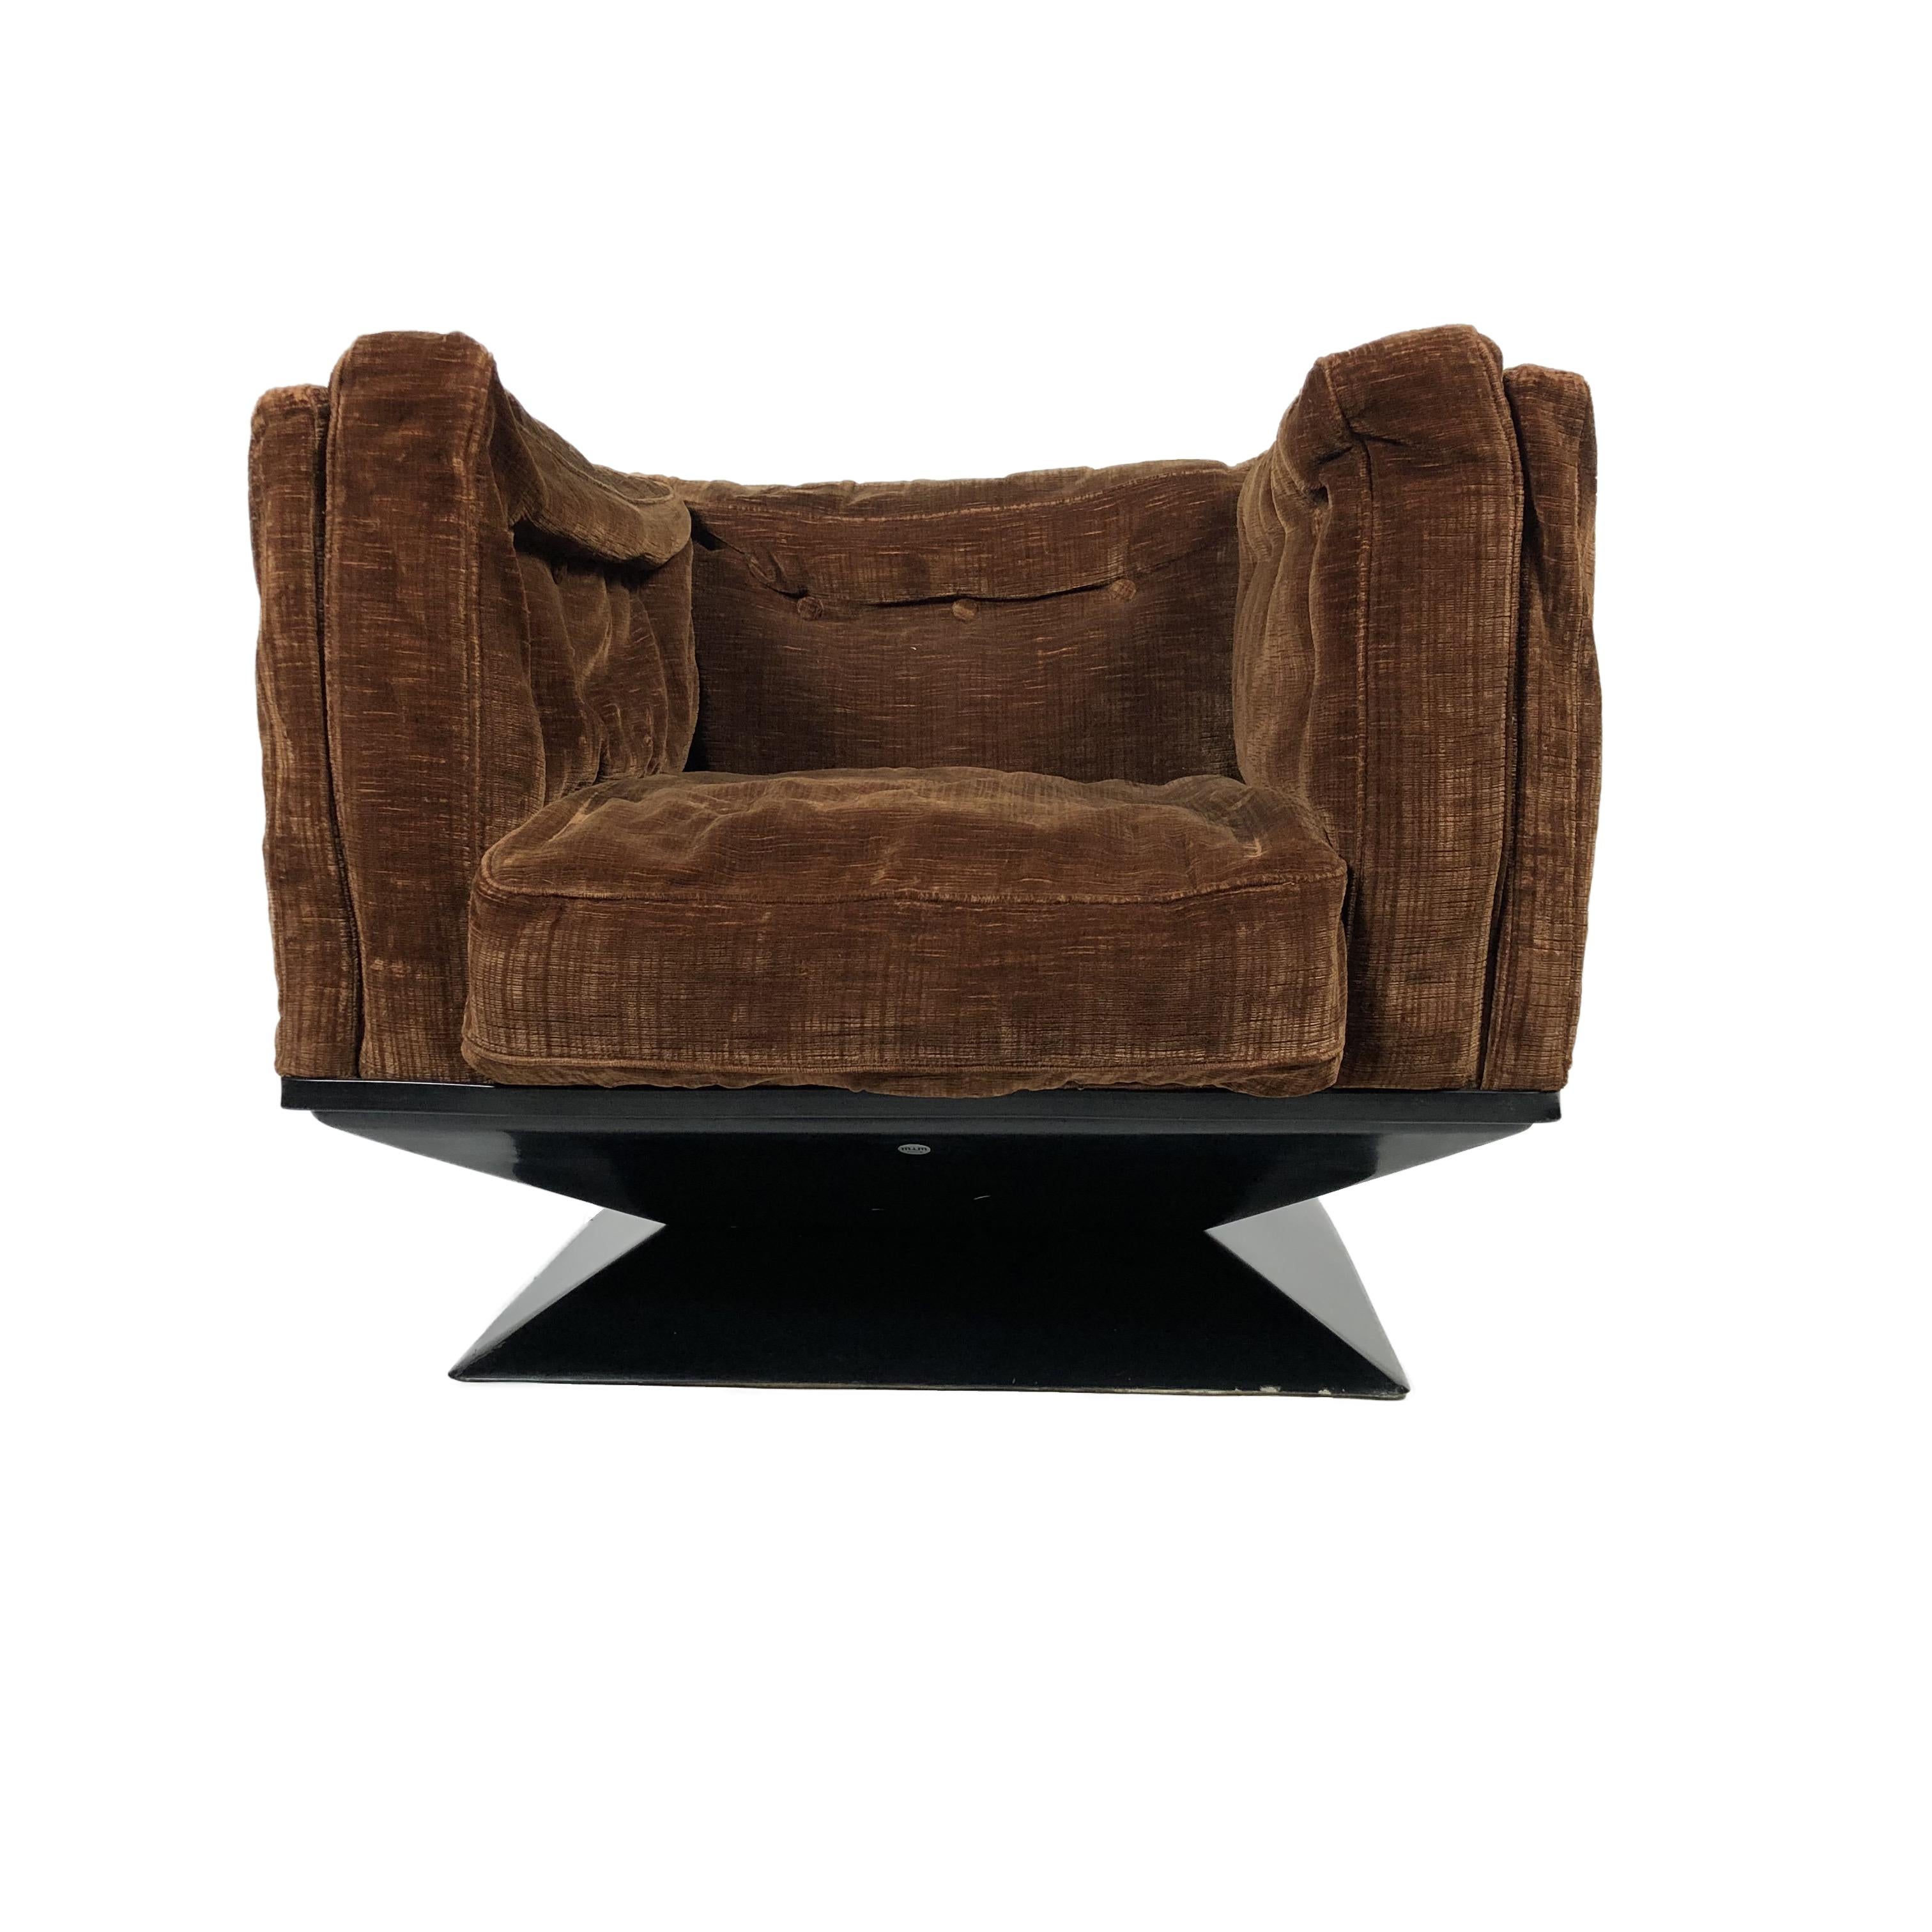 Brown velvet armchair by Luigi Pellegrin for MIM, Roma, 1950s, Italy.
Featuring a fiberglass base in good condition, some signs or bumps visible in the pictures, the cushions should be restored with new-style fabrics (service that we can perform on